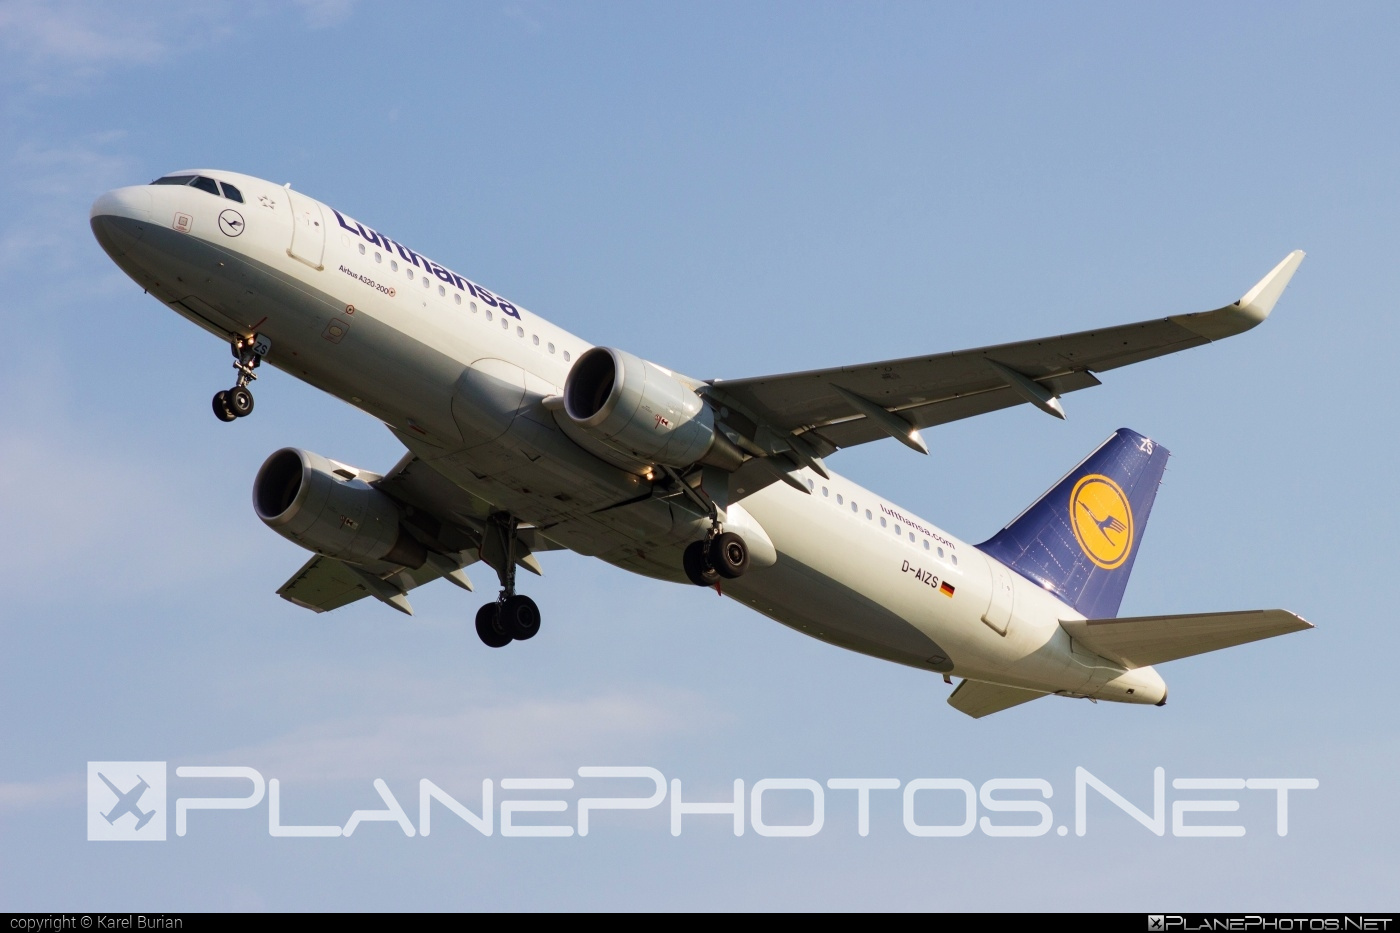 Airbus A320-214 - D-AIZS operated by Lufthansa #a320 #a320family #airbus #airbus320 #lufthansa